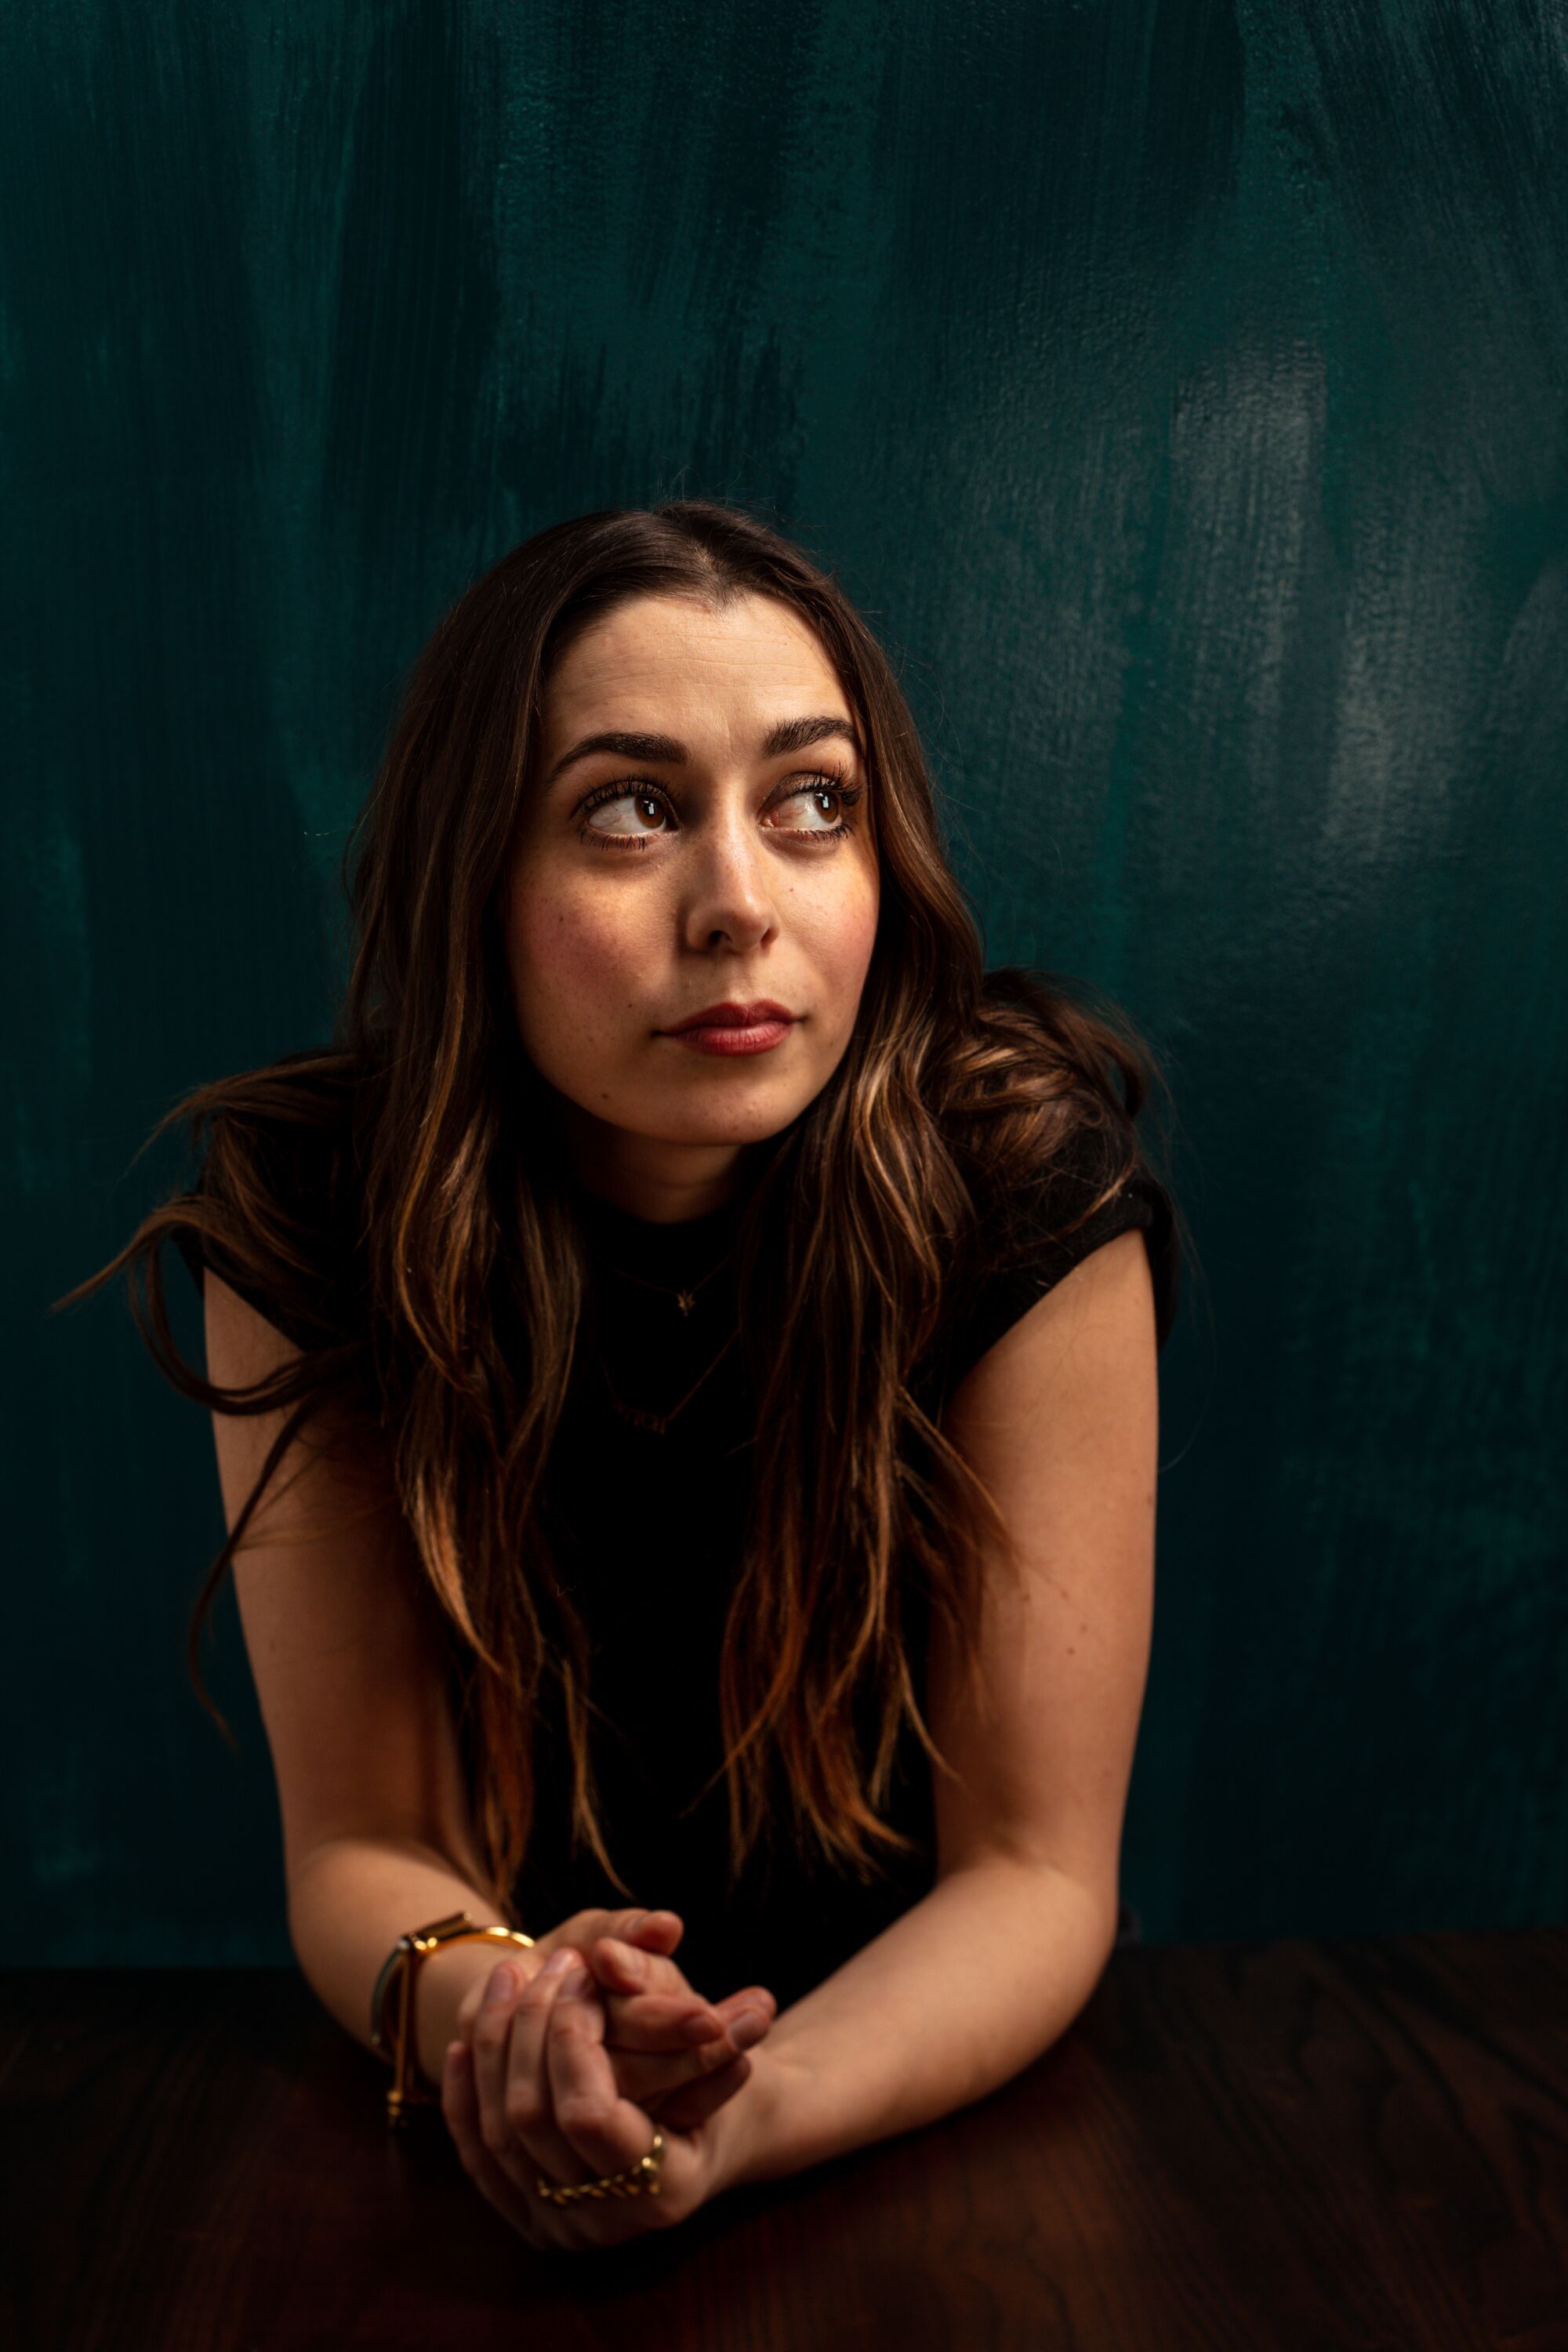 Actor Cristin Milioti of “Palm Springs,” photographed in the L.A. Times Studio at the Sundance Film Festival.